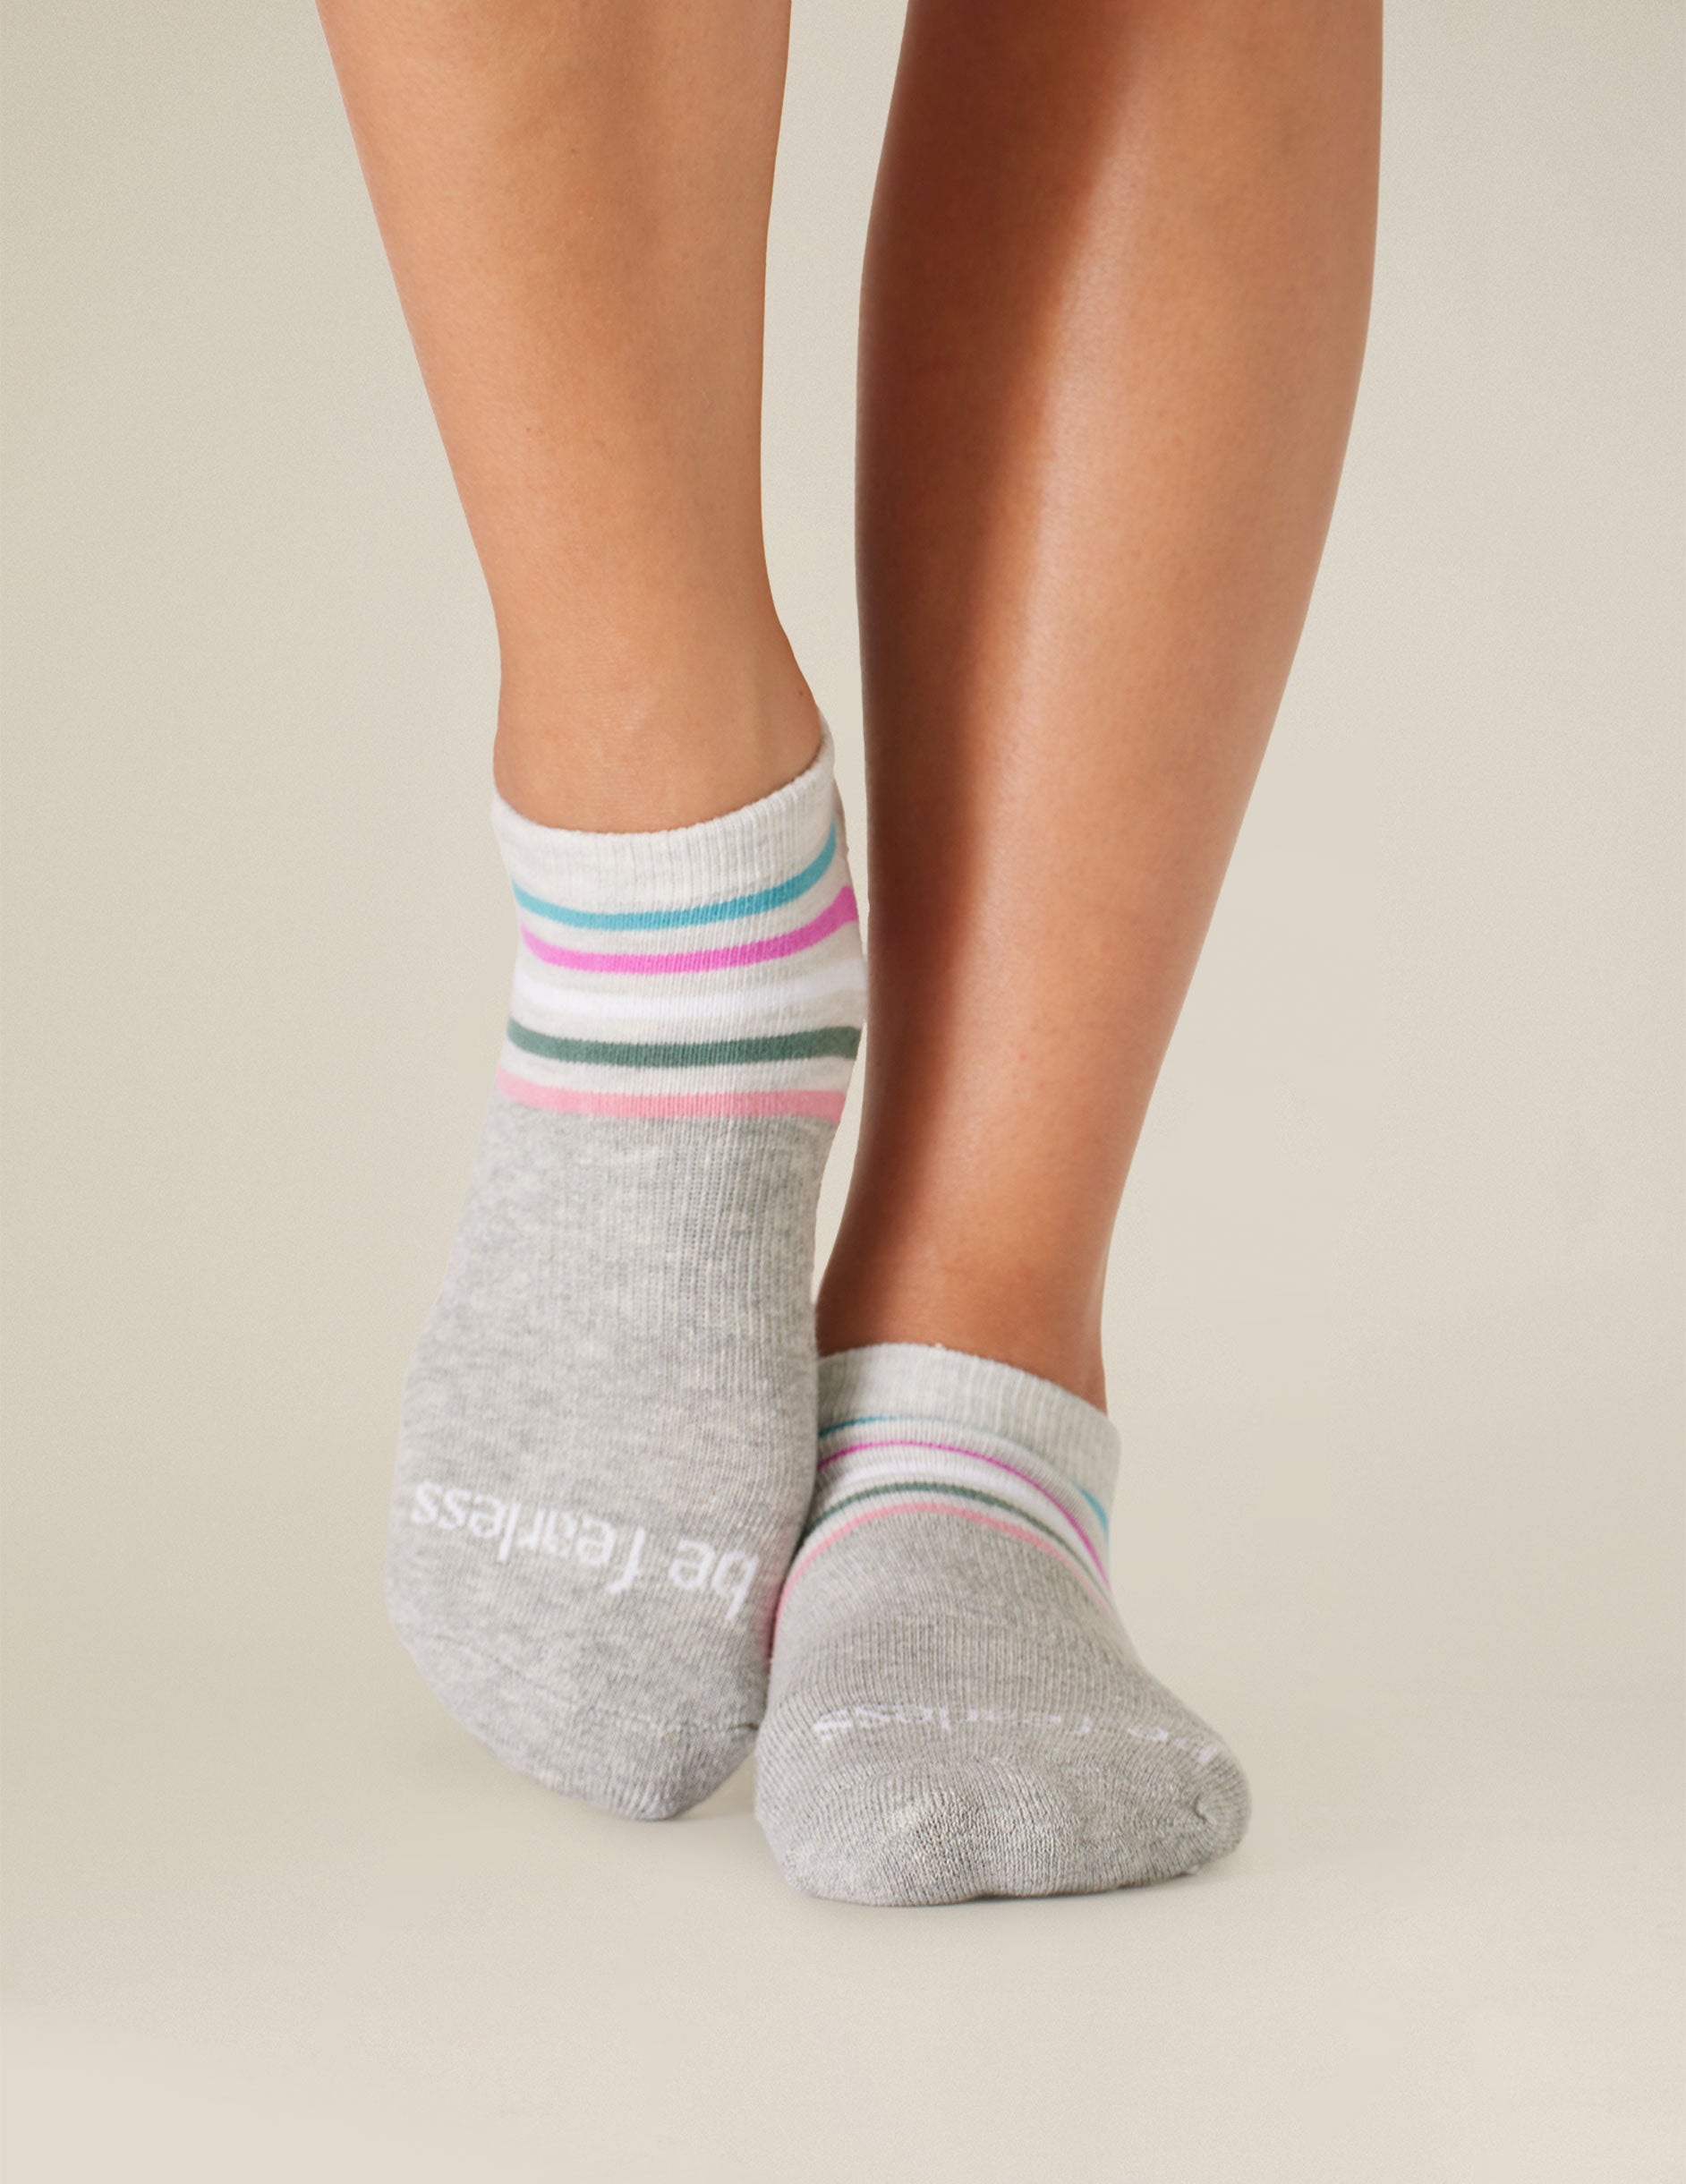 Sticky Be Fearless Grip Socks Primary Image